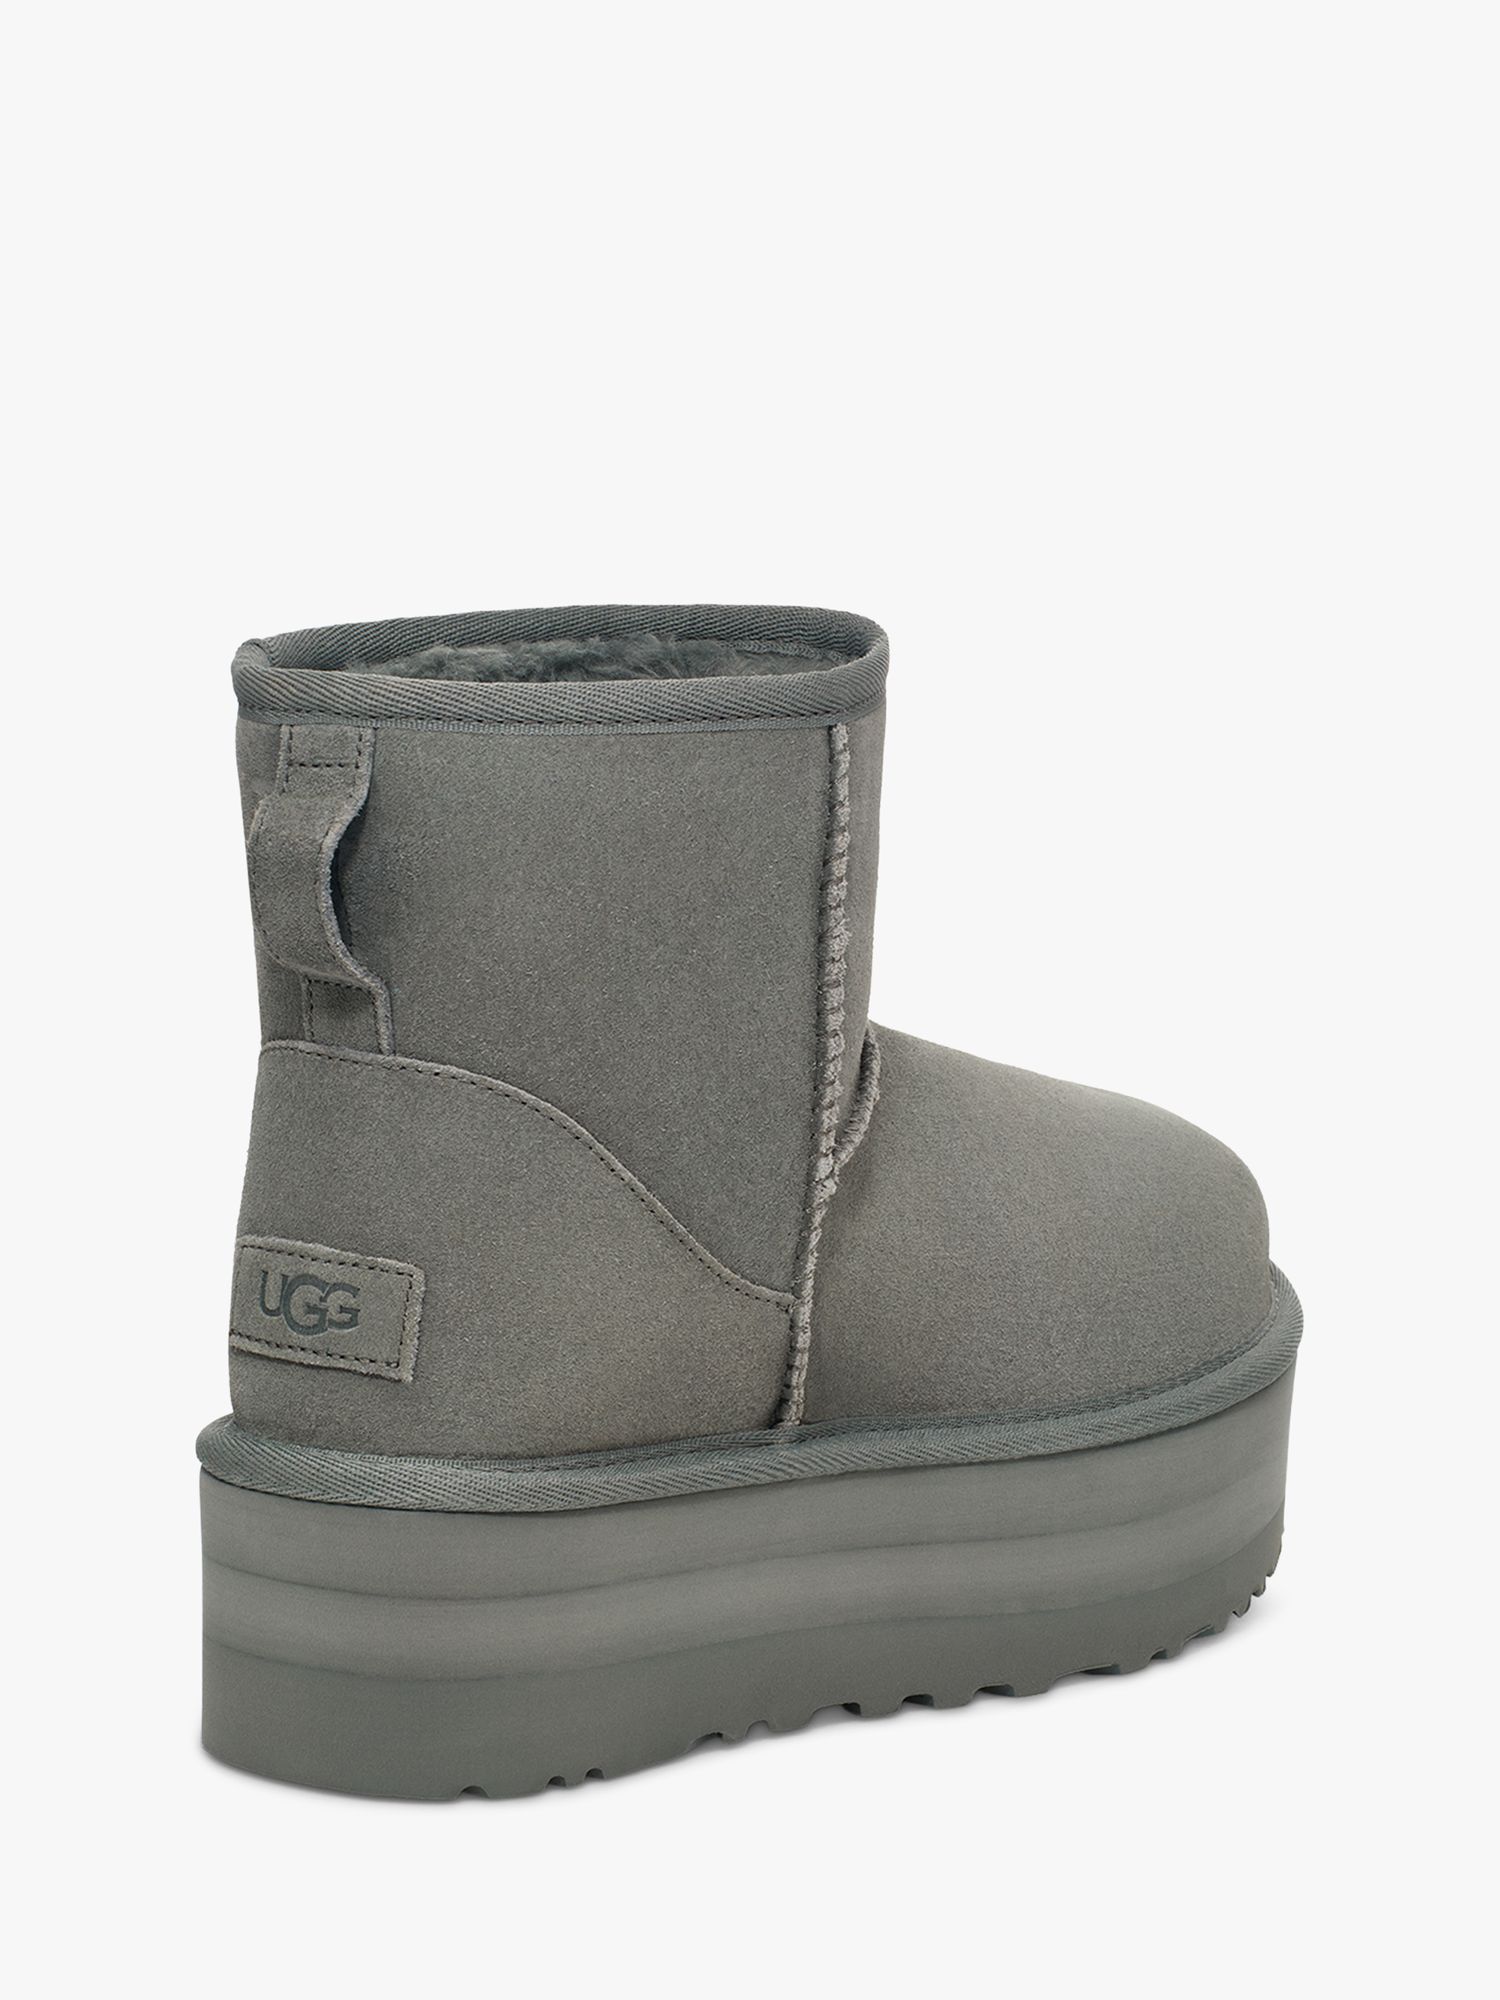 Buy UGG Class Mini Suede Flatform Ankle Boots Online at johnlewis.com